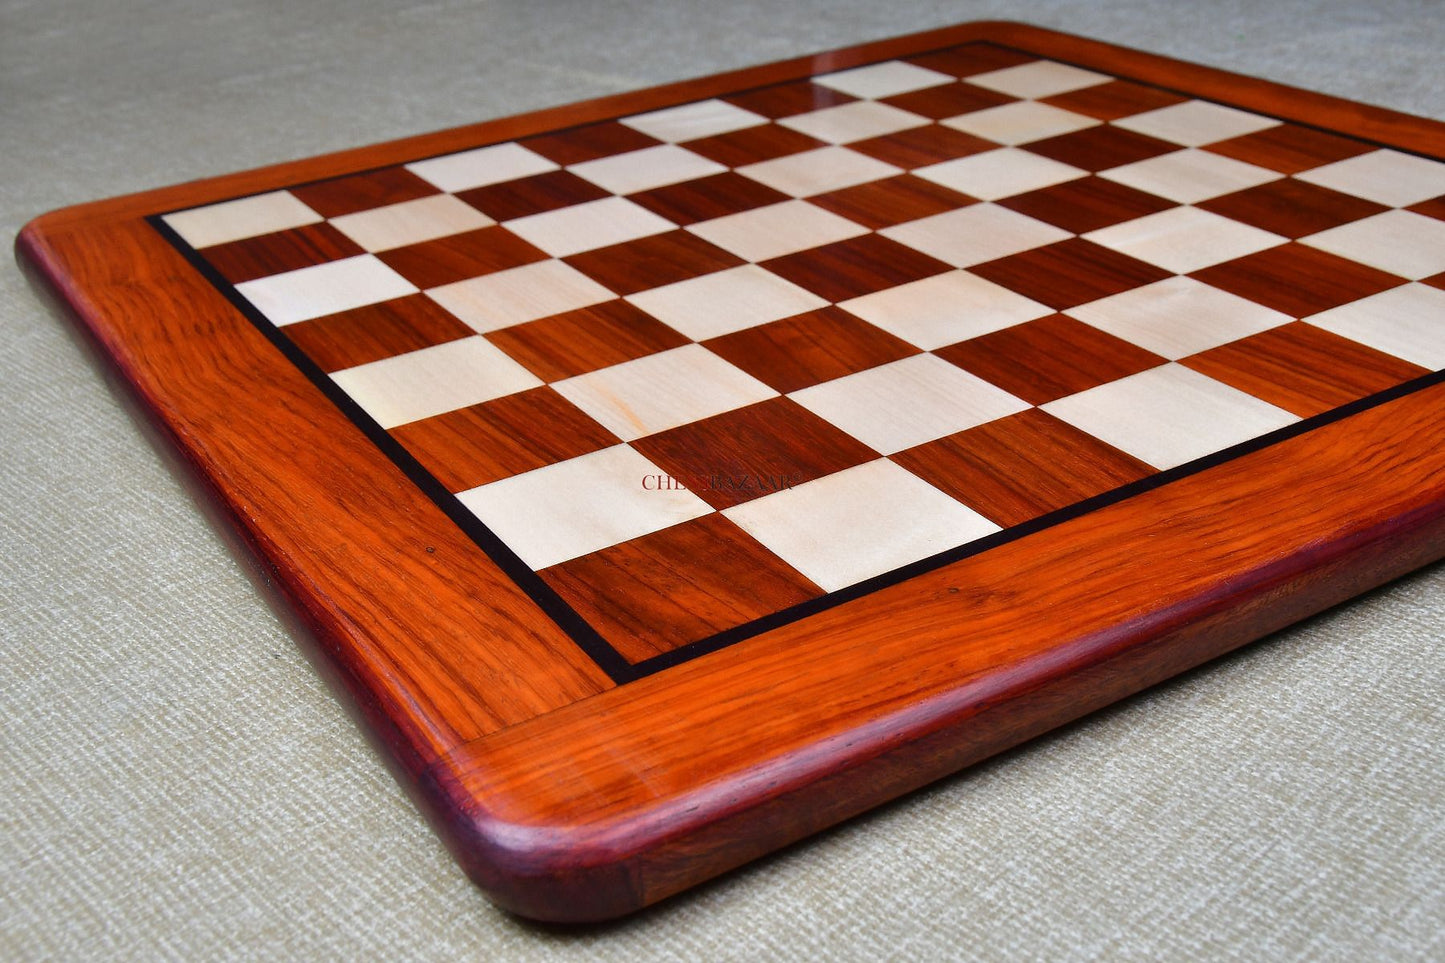 Wooden Chess Board Blood Red Bud Rose Wood 18" - 45 mm